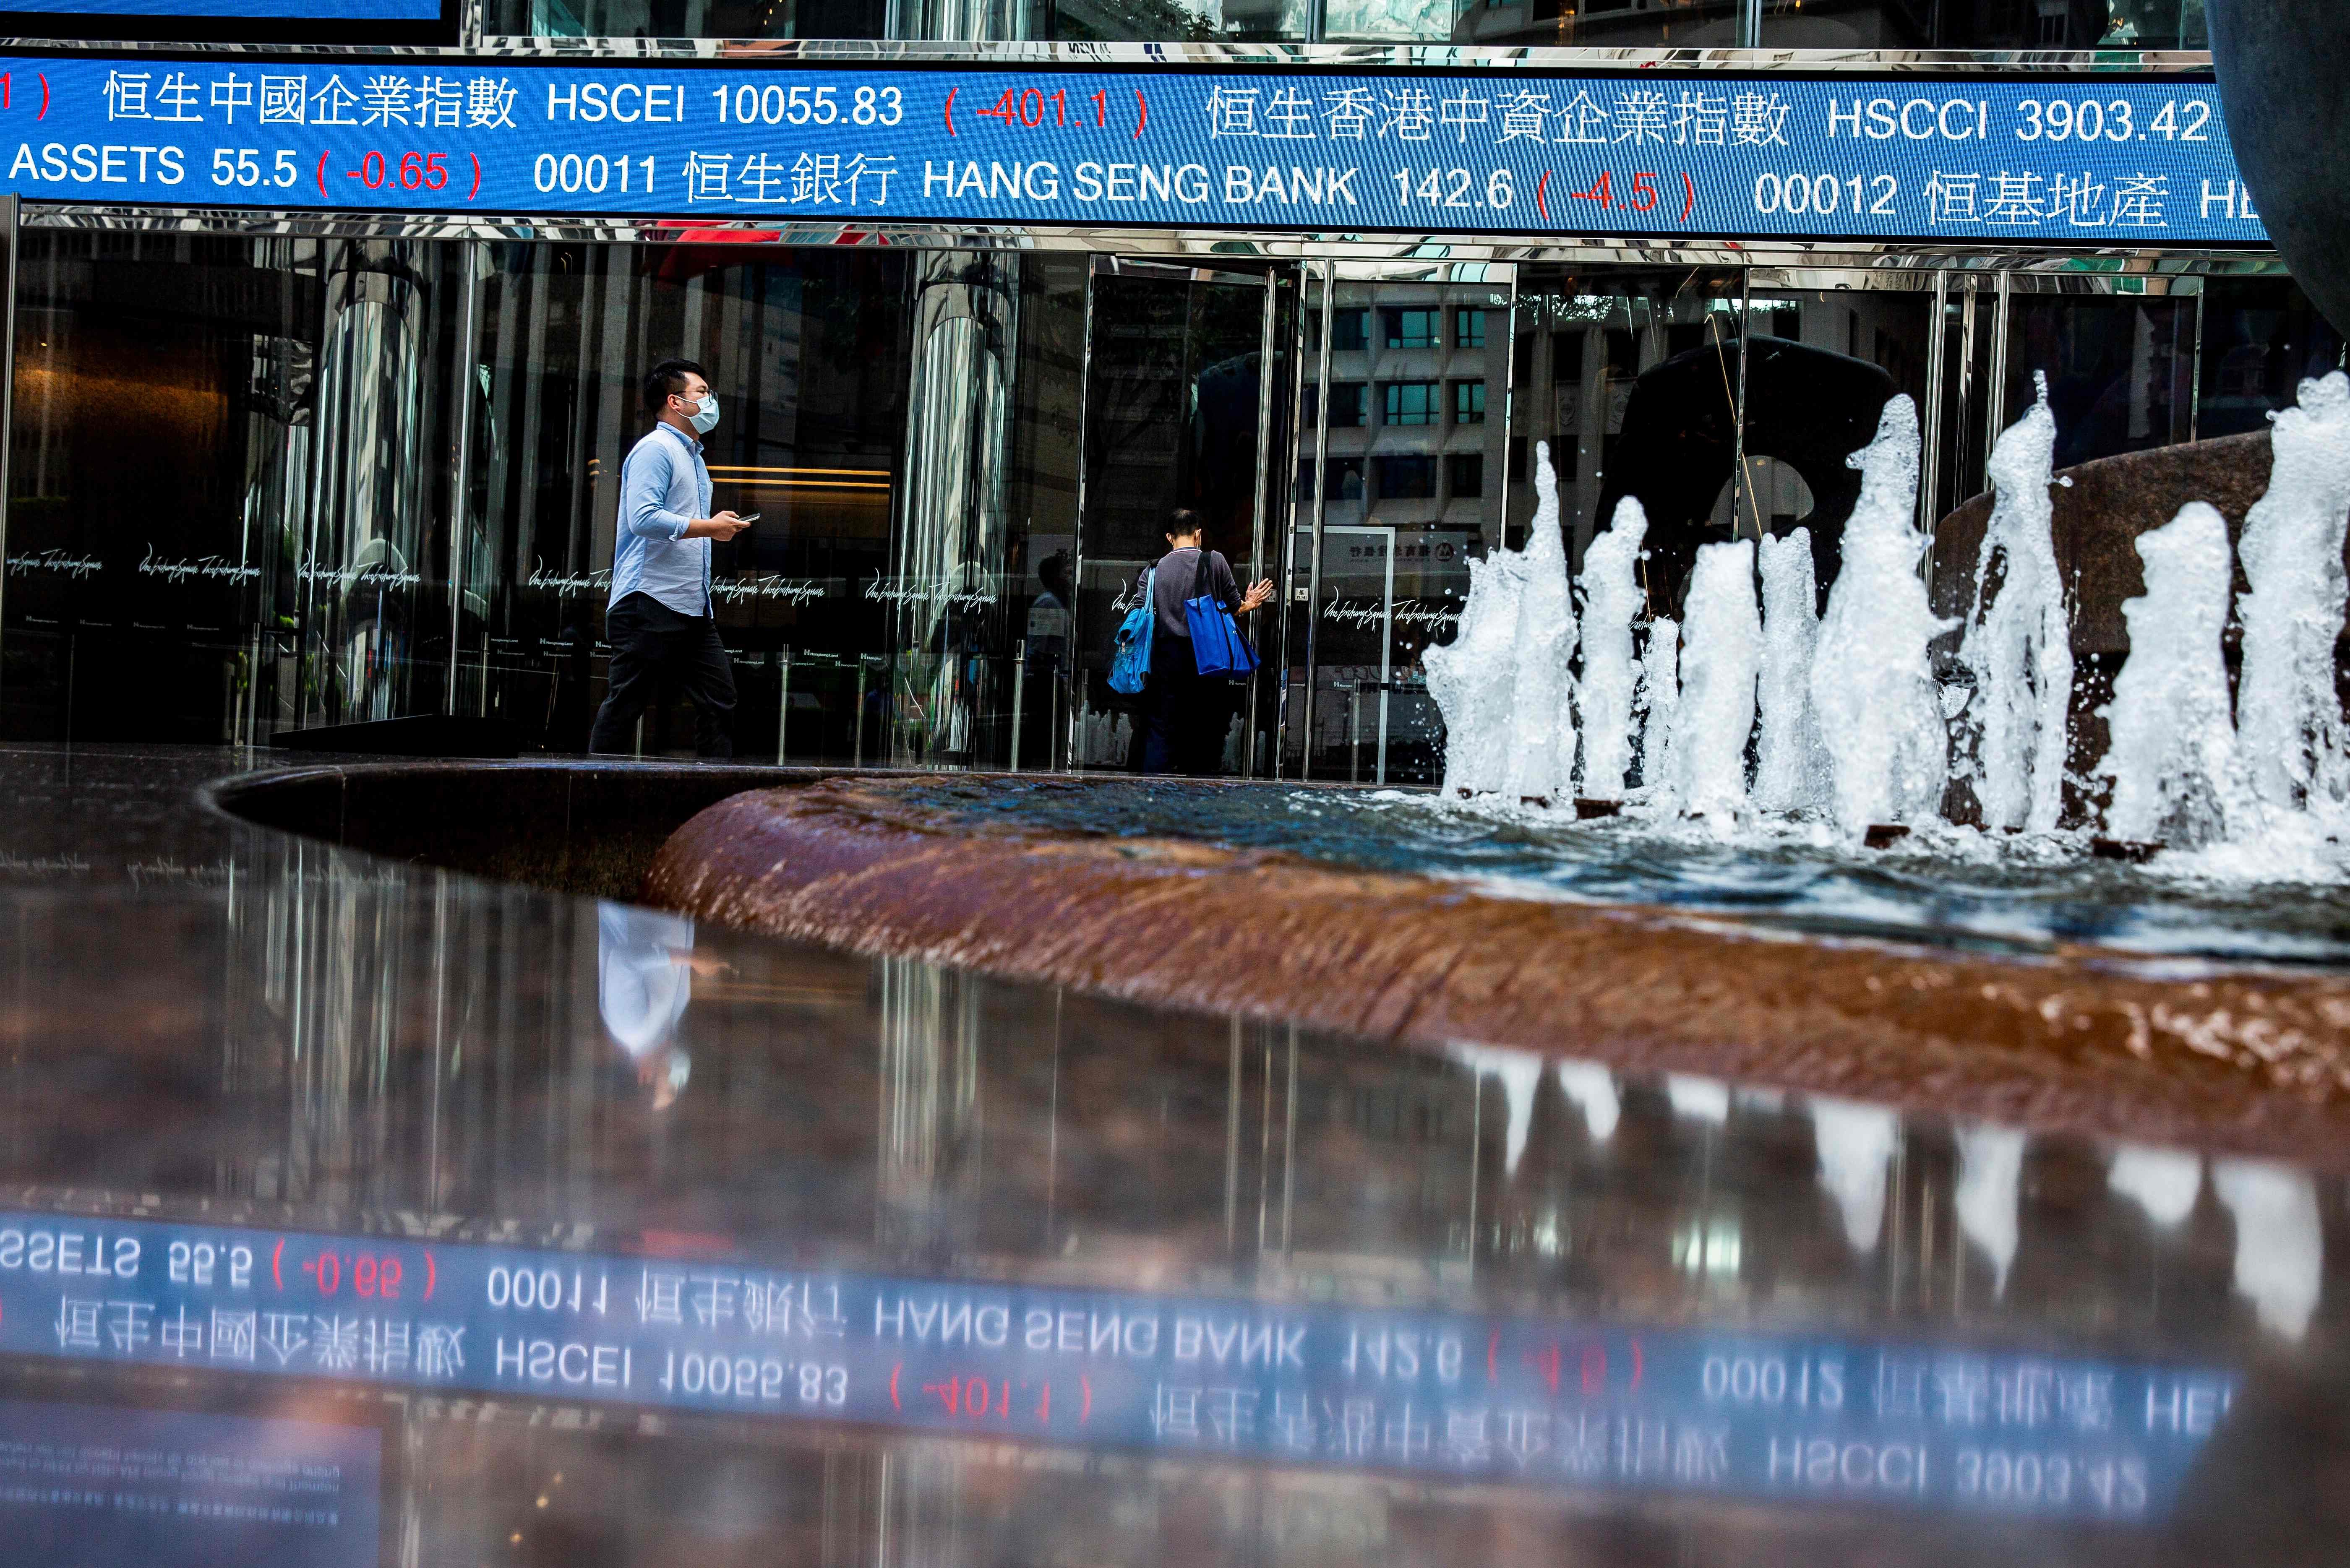 An electronic ticker board displays various stock prices as a mask-clad pedestrian walks past at Exchange Square in Hong Kong. (Credit: AFP)